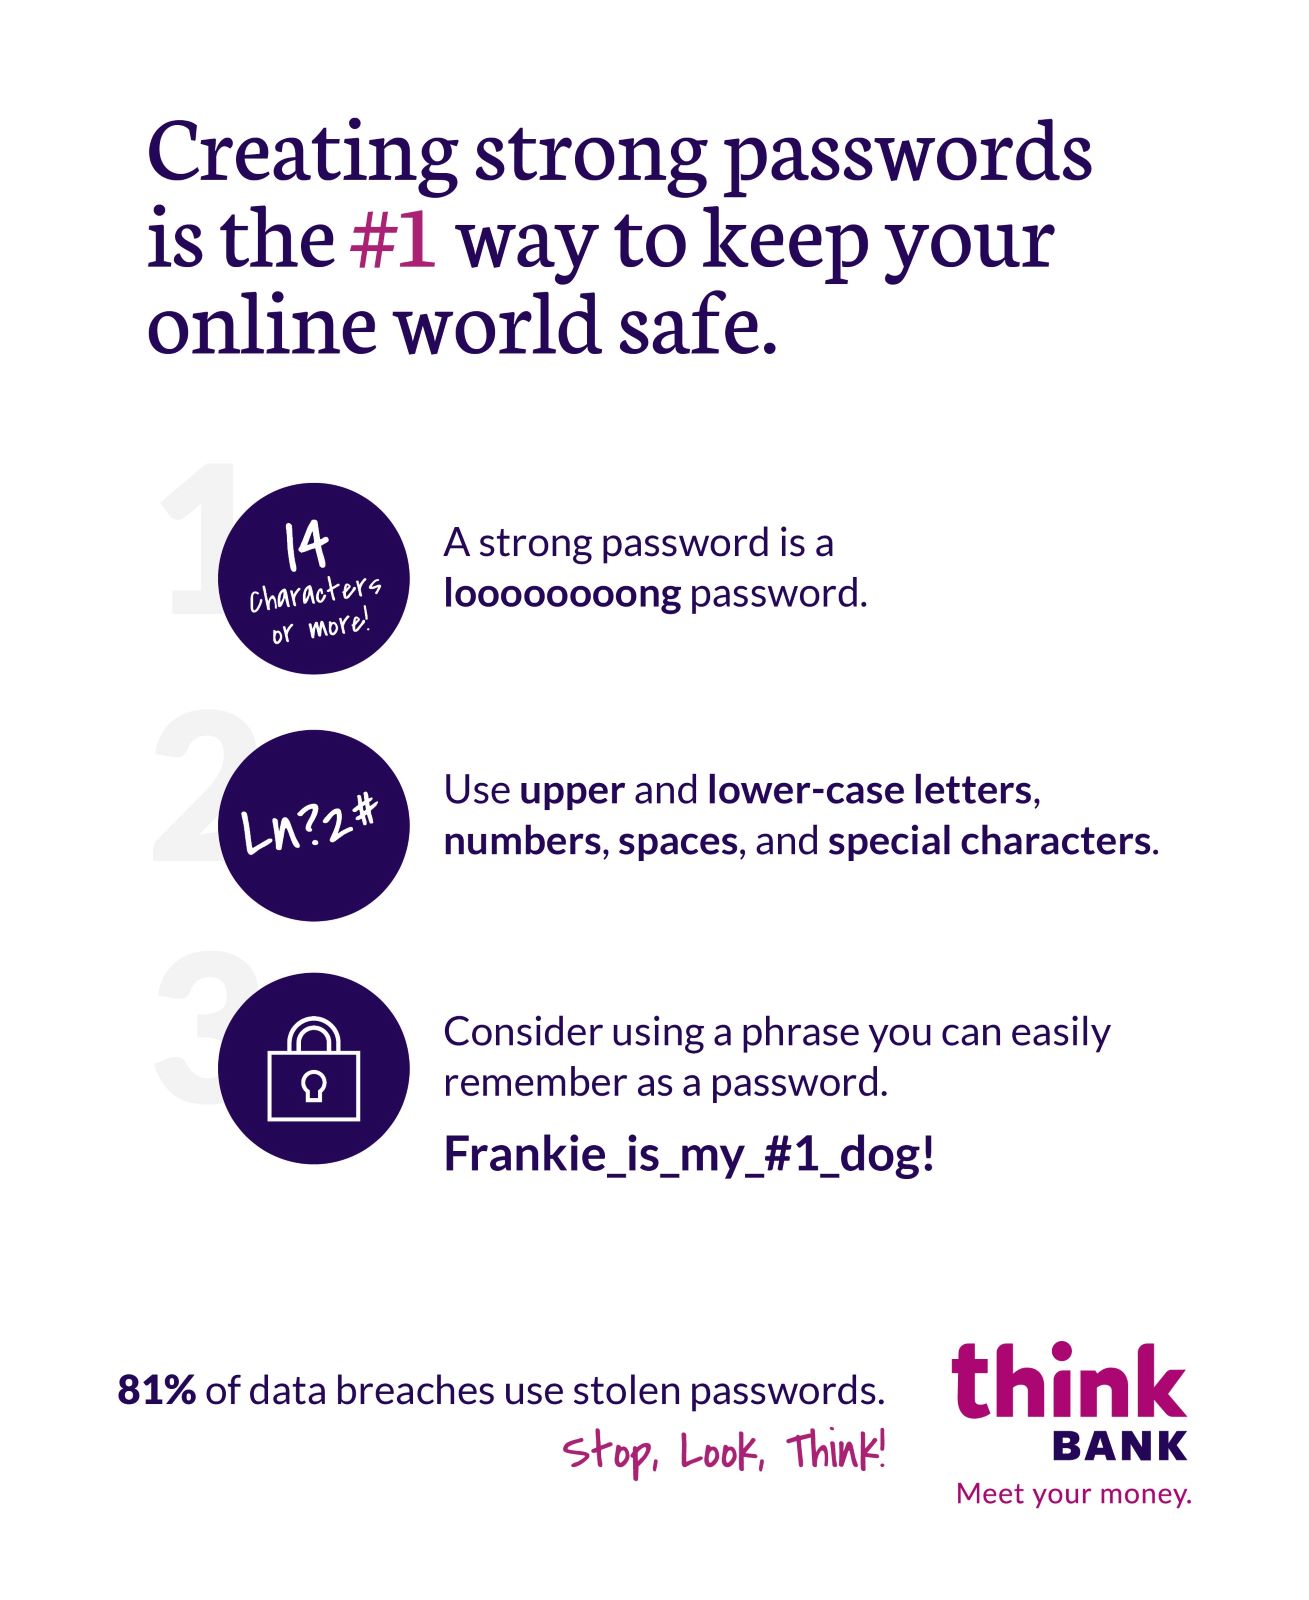 Creating strong passwords is the number one way to keep your online world safe.